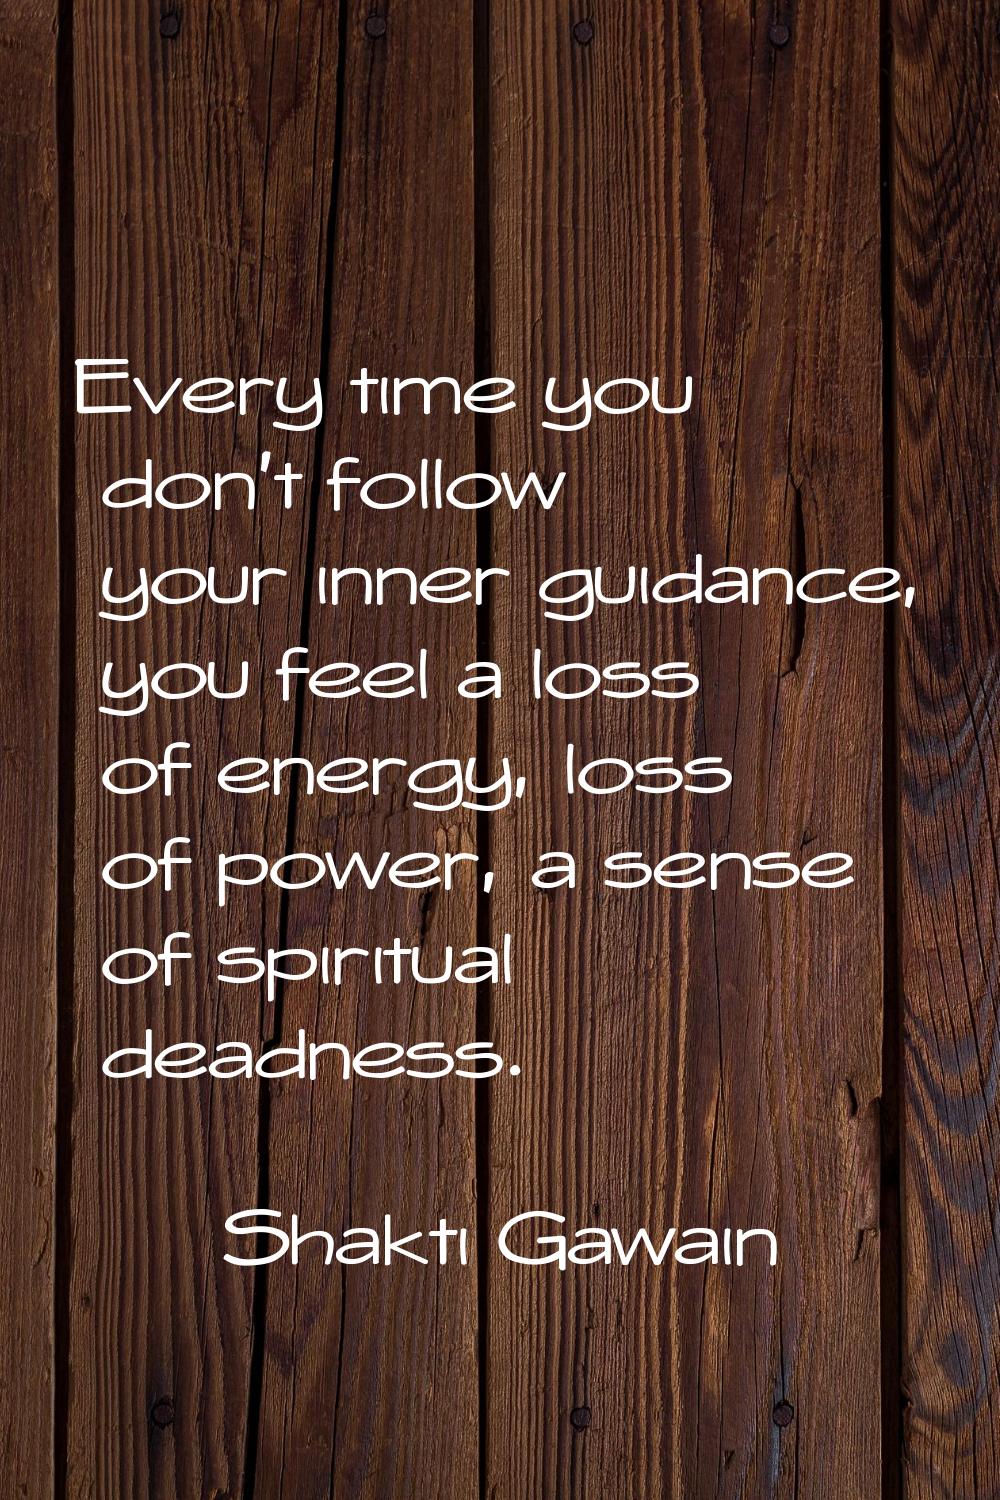 Every time you don't follow your inner guidance, you feel a loss of energy, loss of power, a sense 